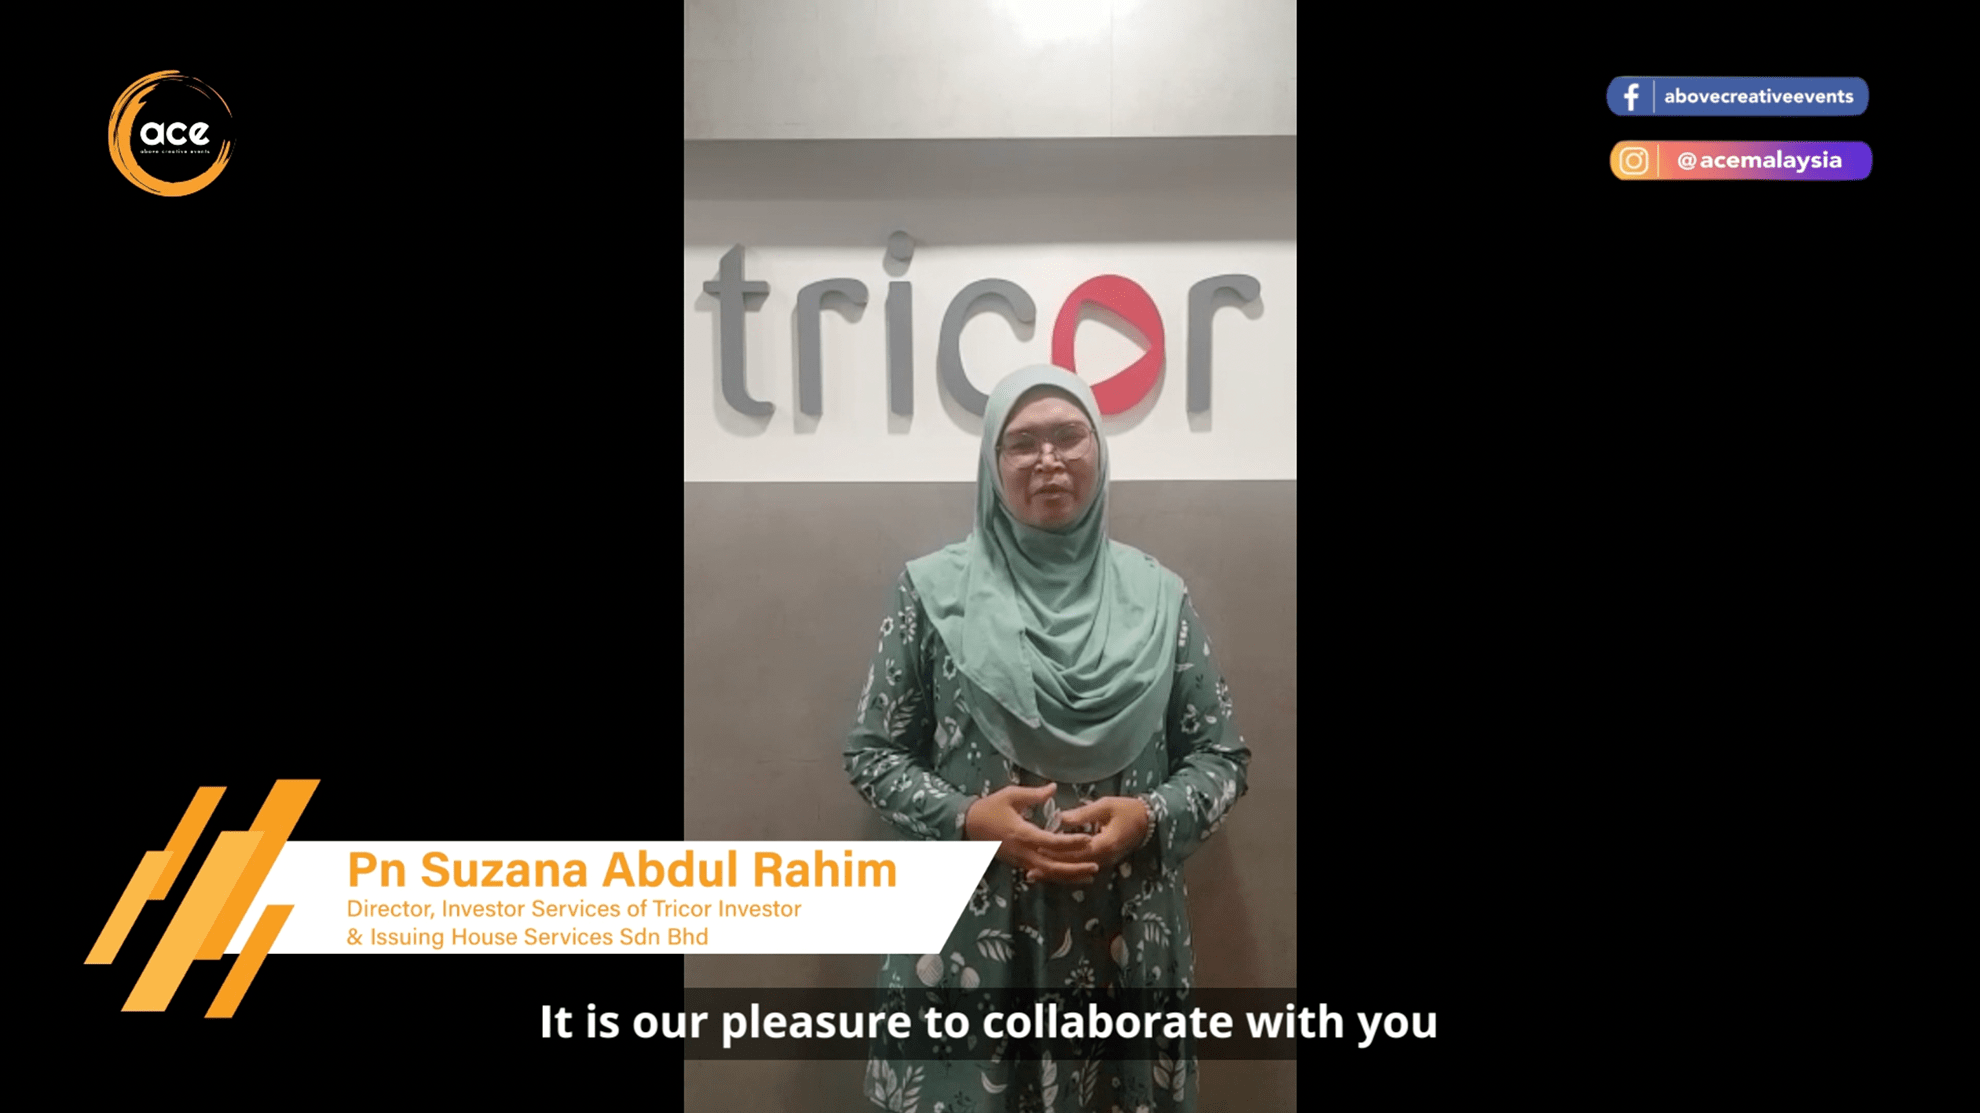 Pn Suzana Abdul Rahim, Tricor investor & Issuing House Services Sdn Bhd